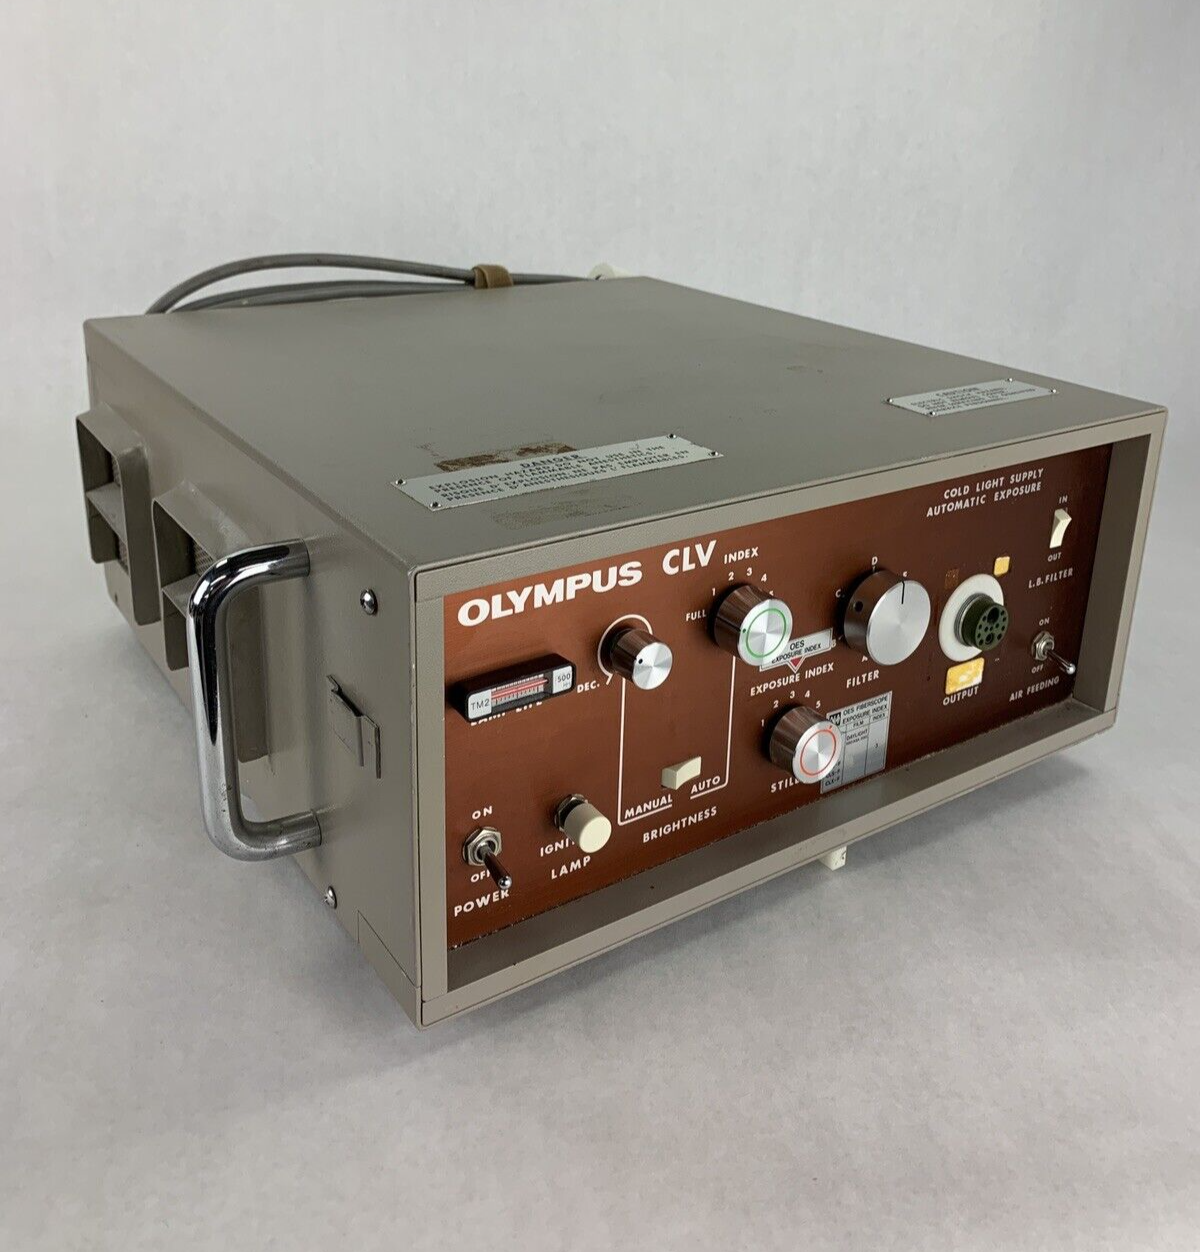 Olympus CLV Cold Light Source Supply 6A 120V 60Hz Power Tested